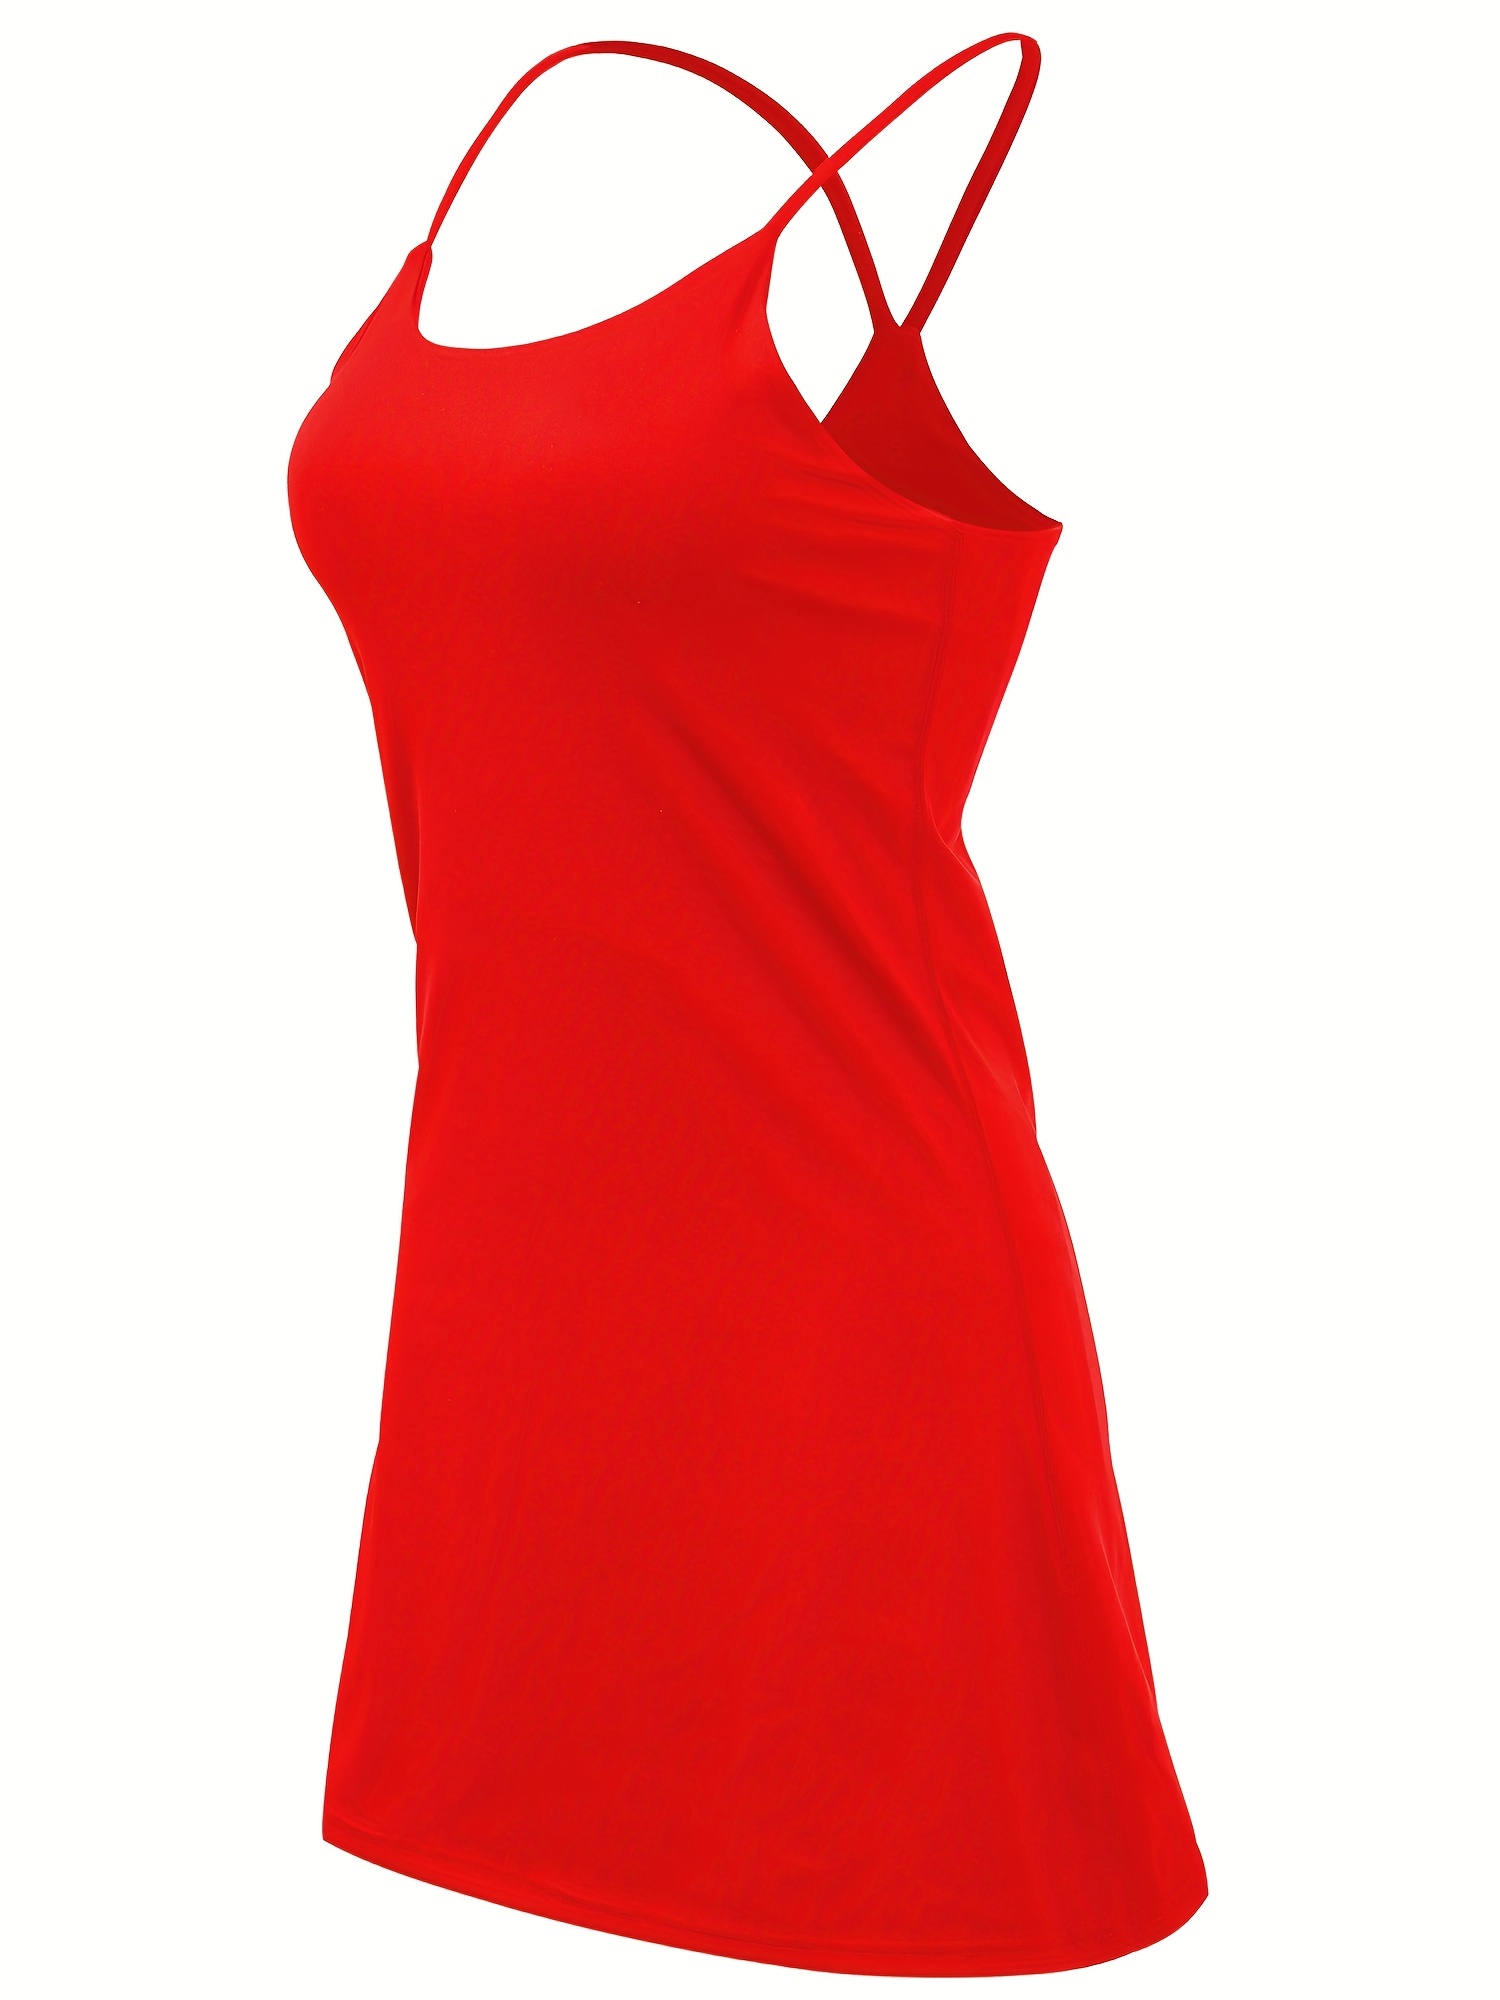 Plus Size Summer Dresses Women Workout Tennis Dress With Built In Bra  Shorts Shoulder Straps And Pockets Red 